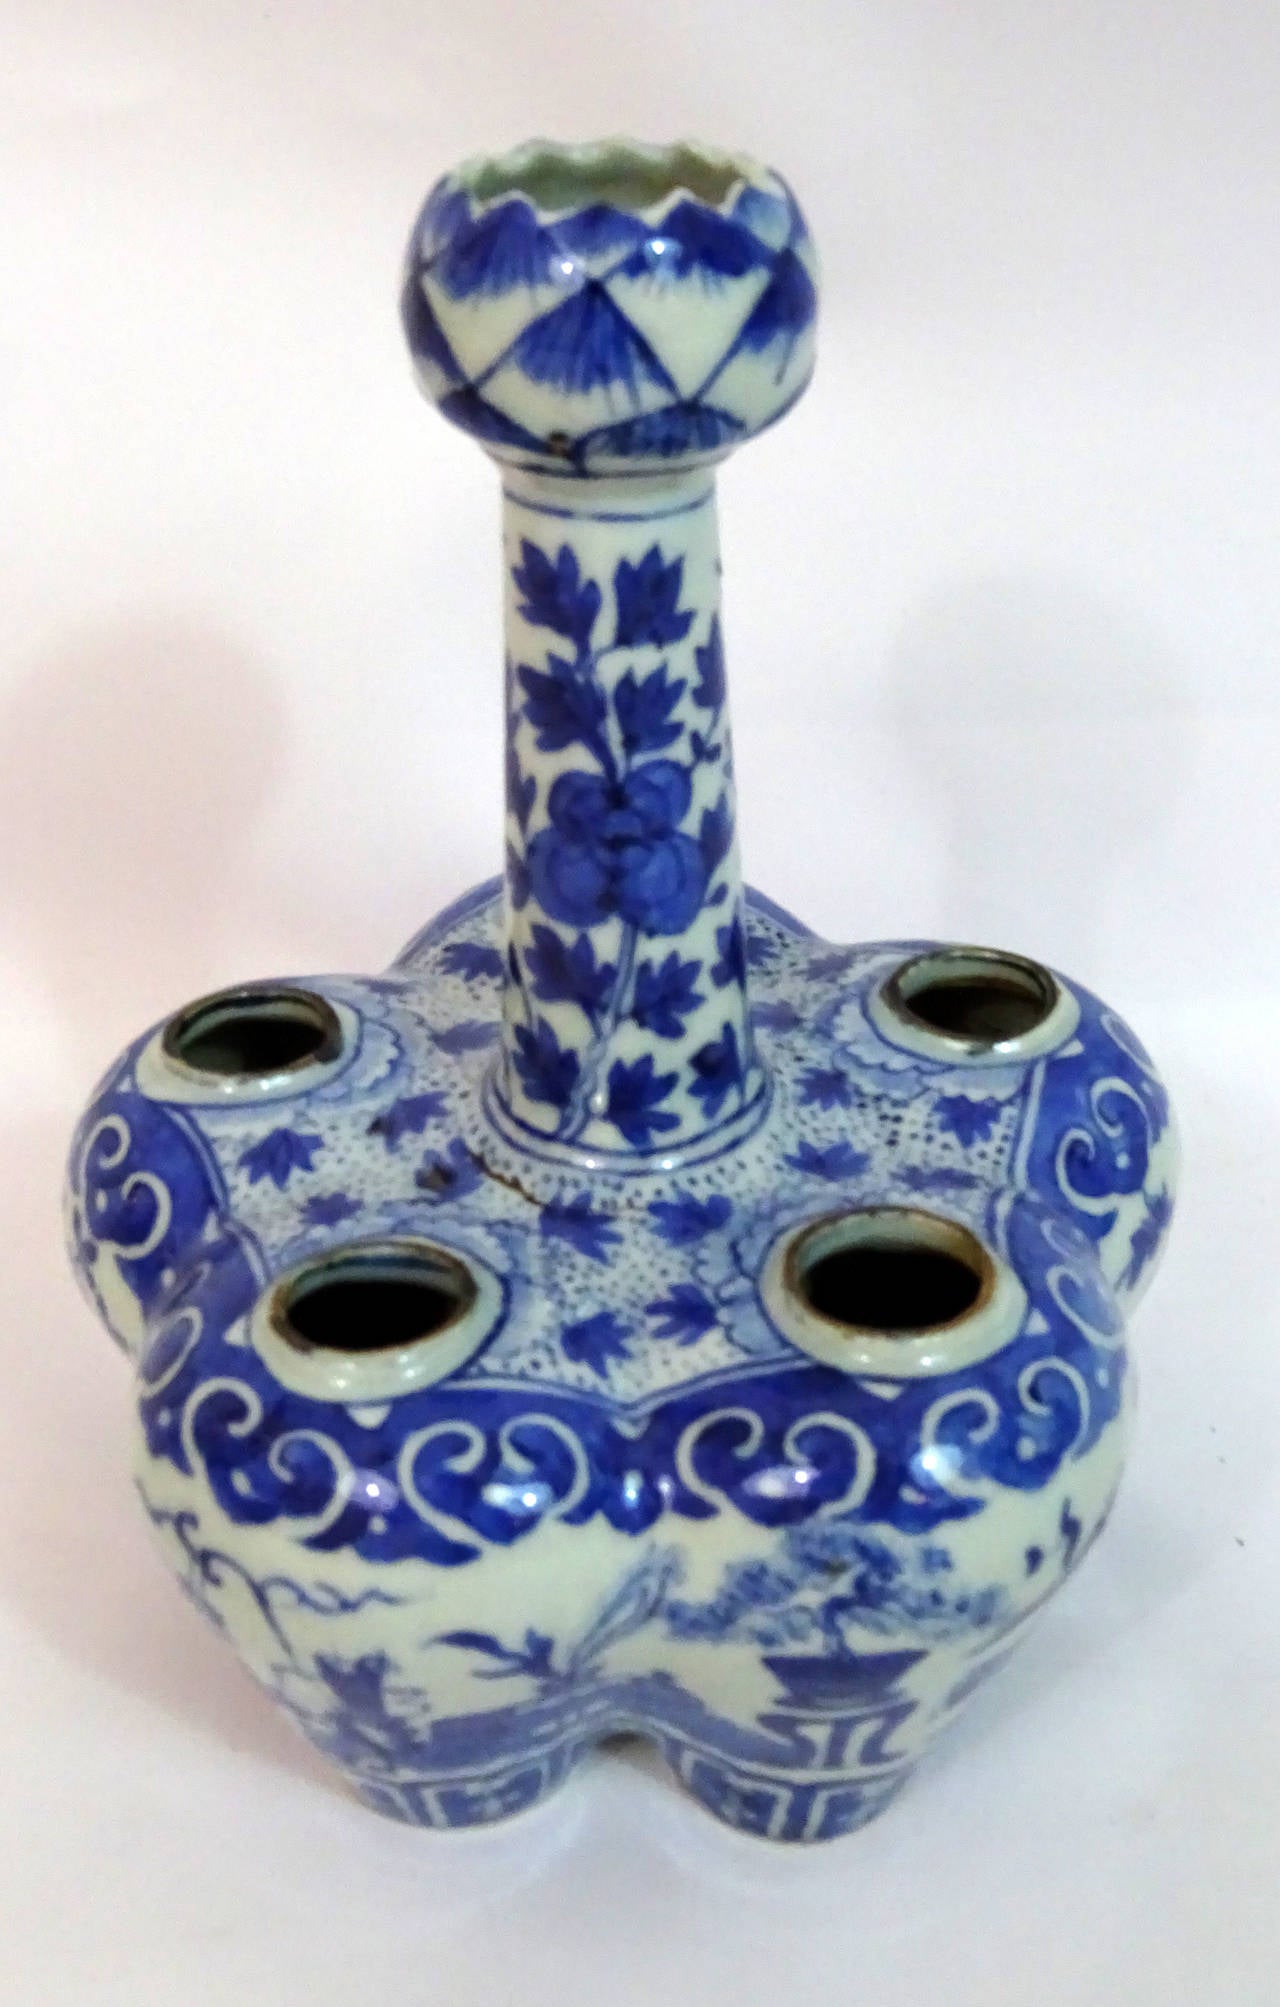 Blue and white porcelain tulipiere from China crafted in the 19th Century.